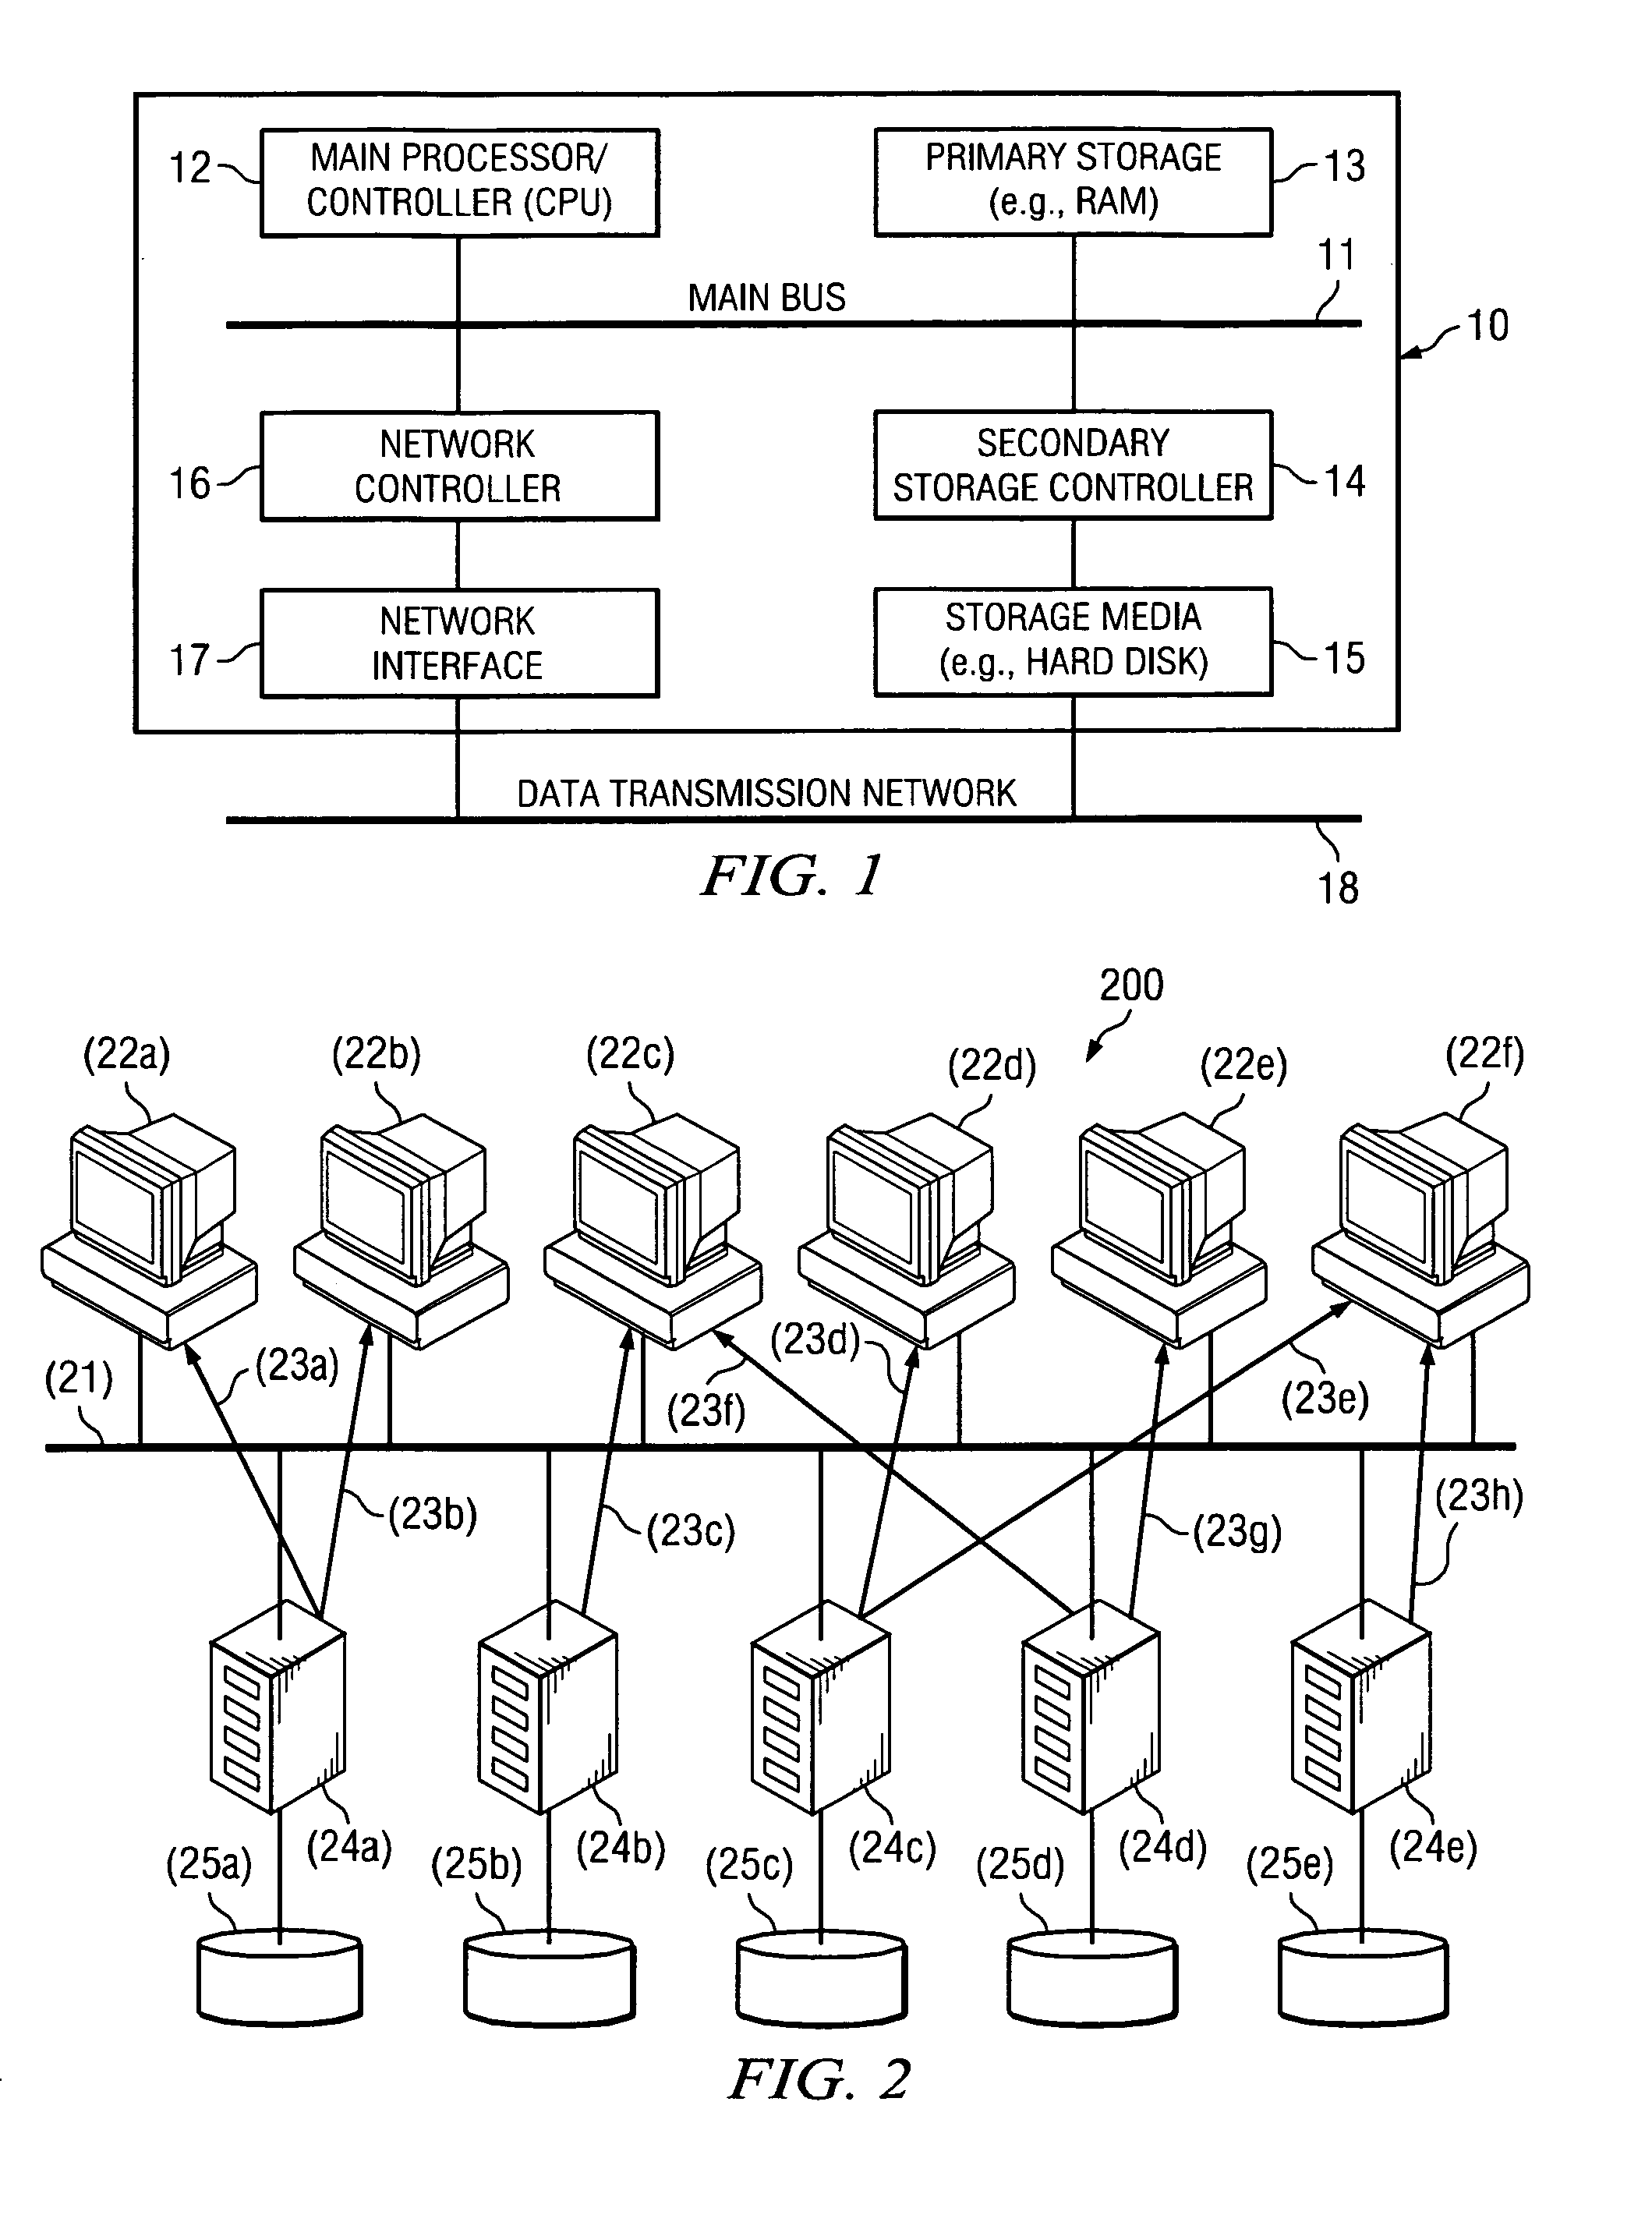 System and method for involving users in object management